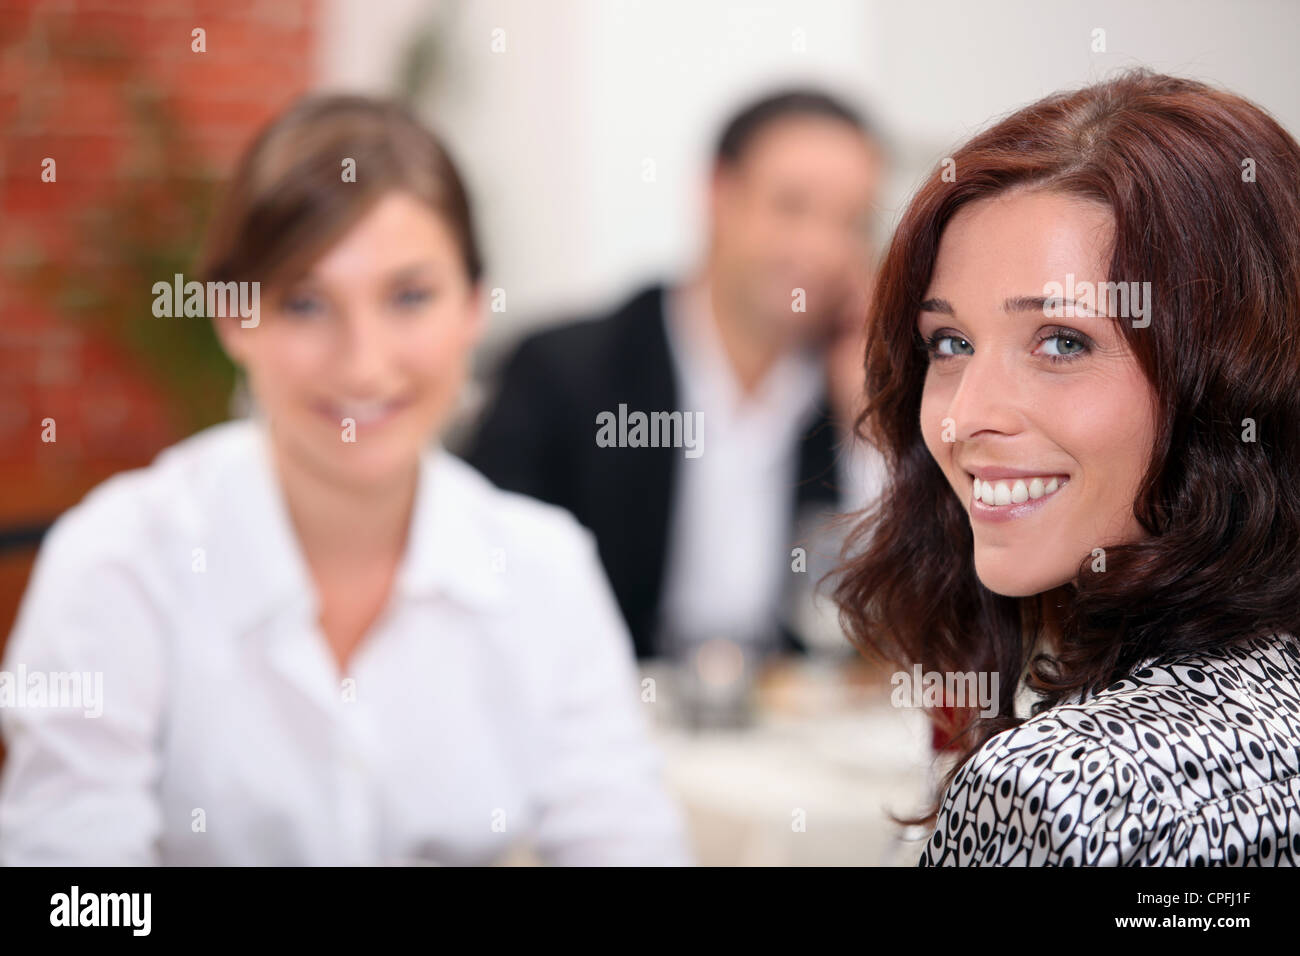 Two female friends at a restaurant. Stock Photo